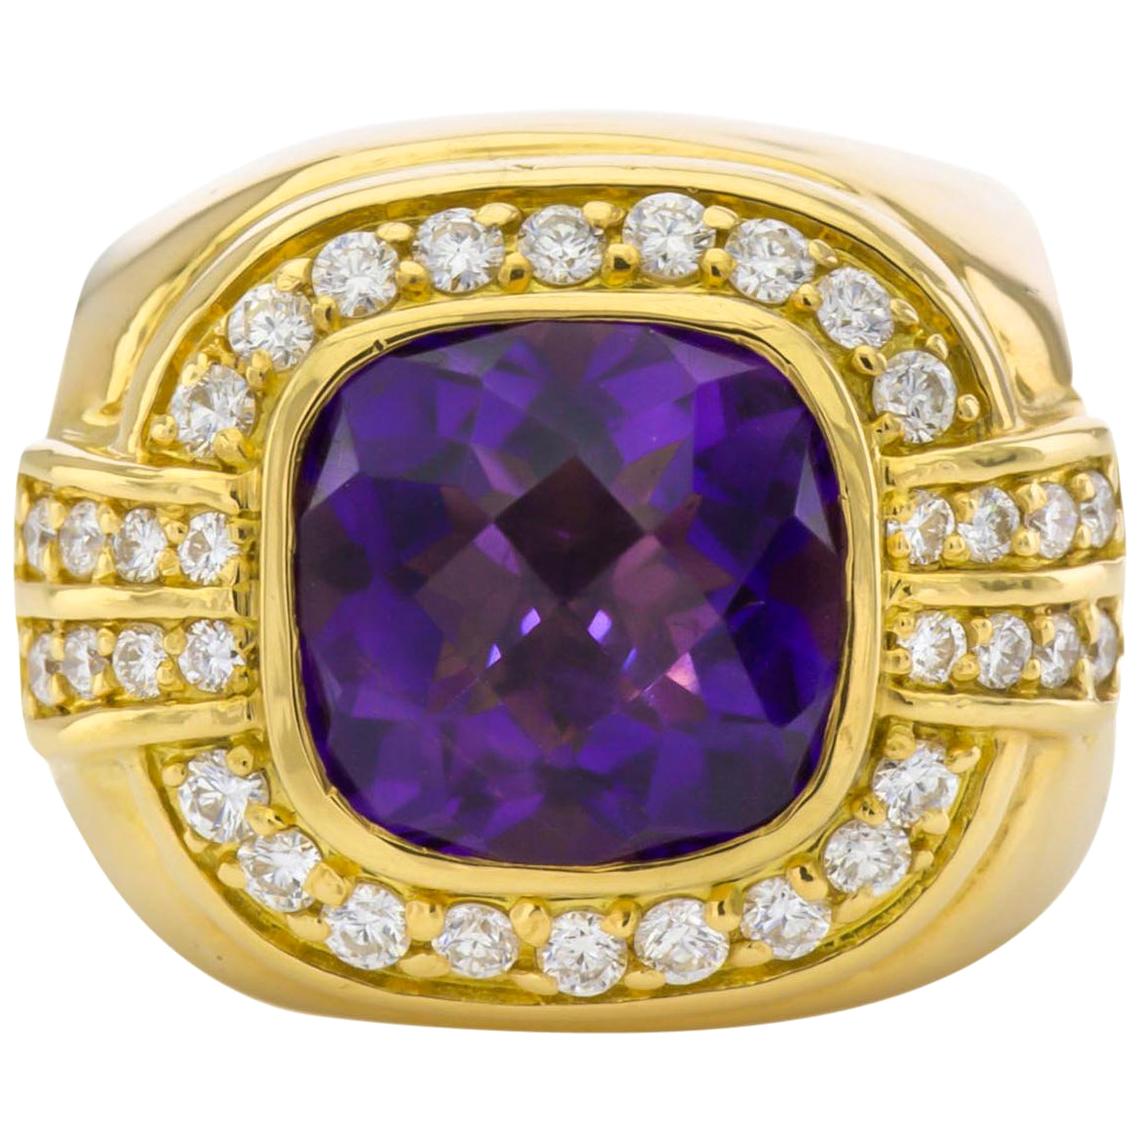 Gold and Faceted Amethyst Ring with Diamonds